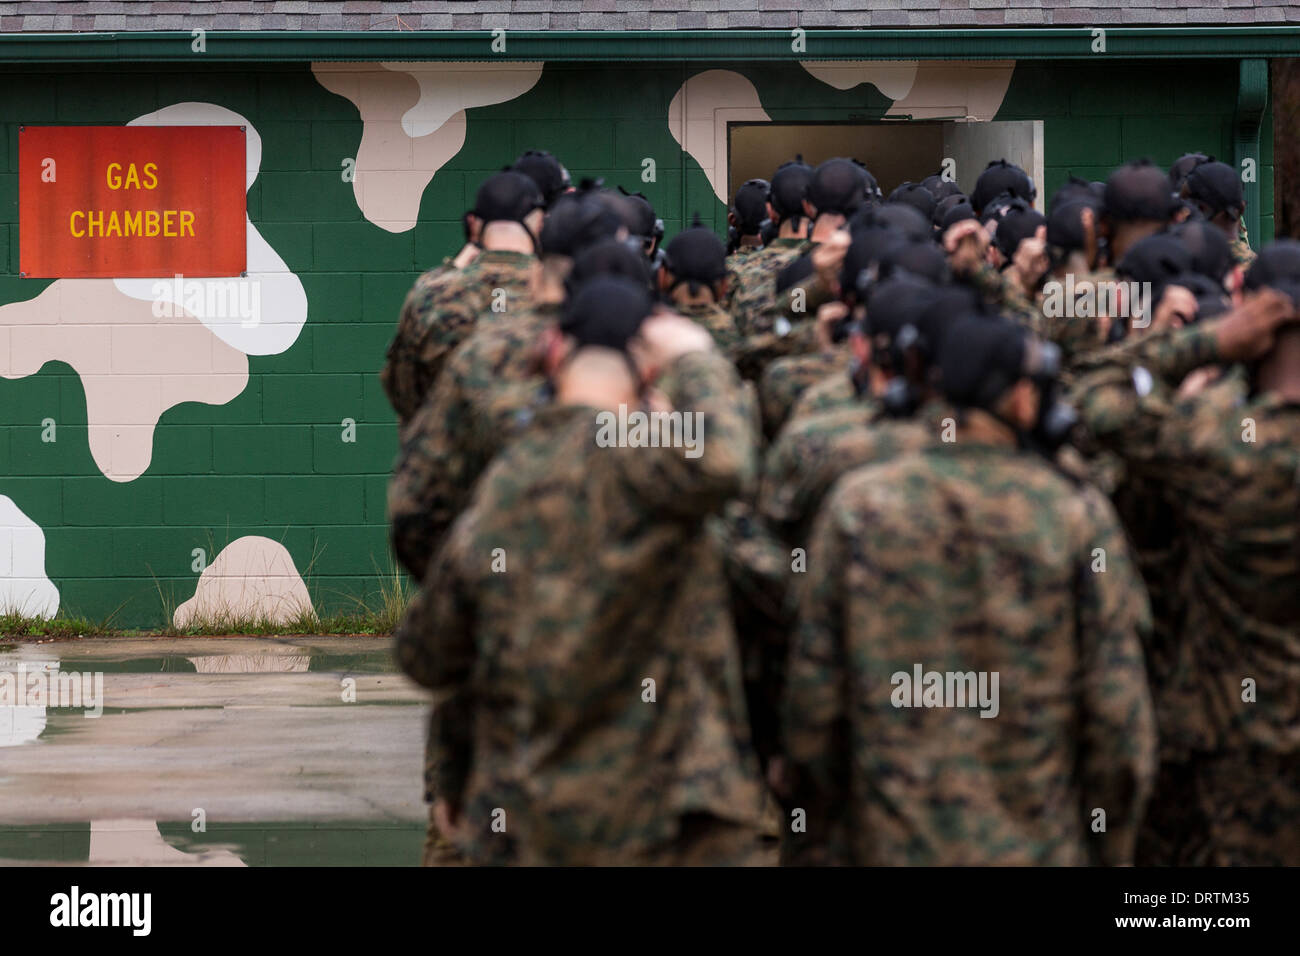 US Marine recruits prepare to enter the gas chamber during boot camp January 13, 2014 in Parris Island, SC. Stock Photo